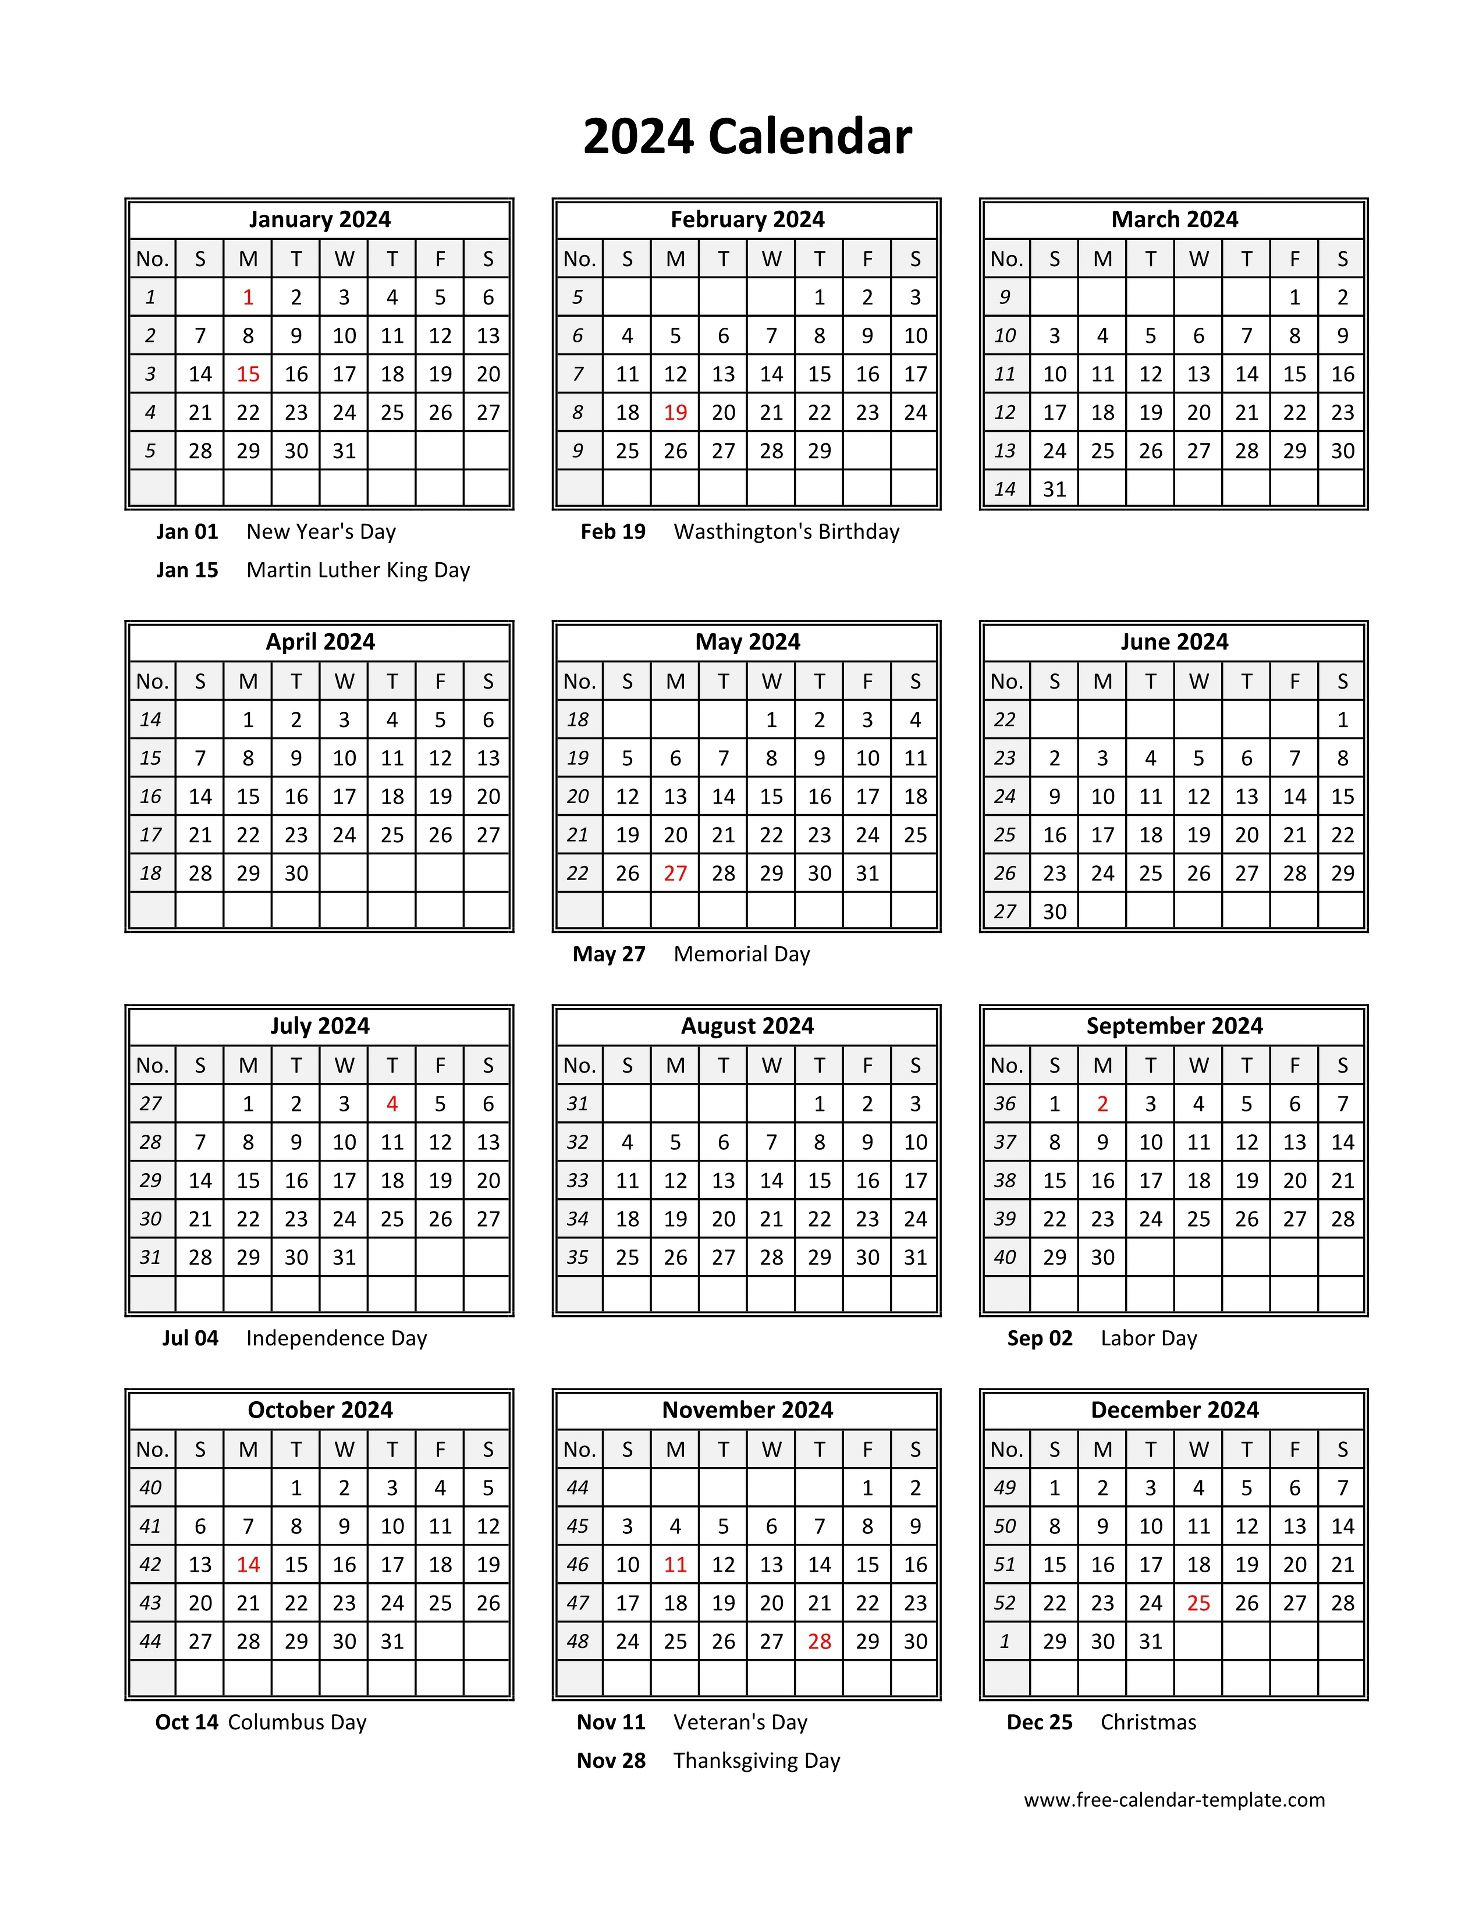 Yearly Printable Calendar 2024 With Holidays | Free-Calendar | 2024 Yearly Calendar Free Printable